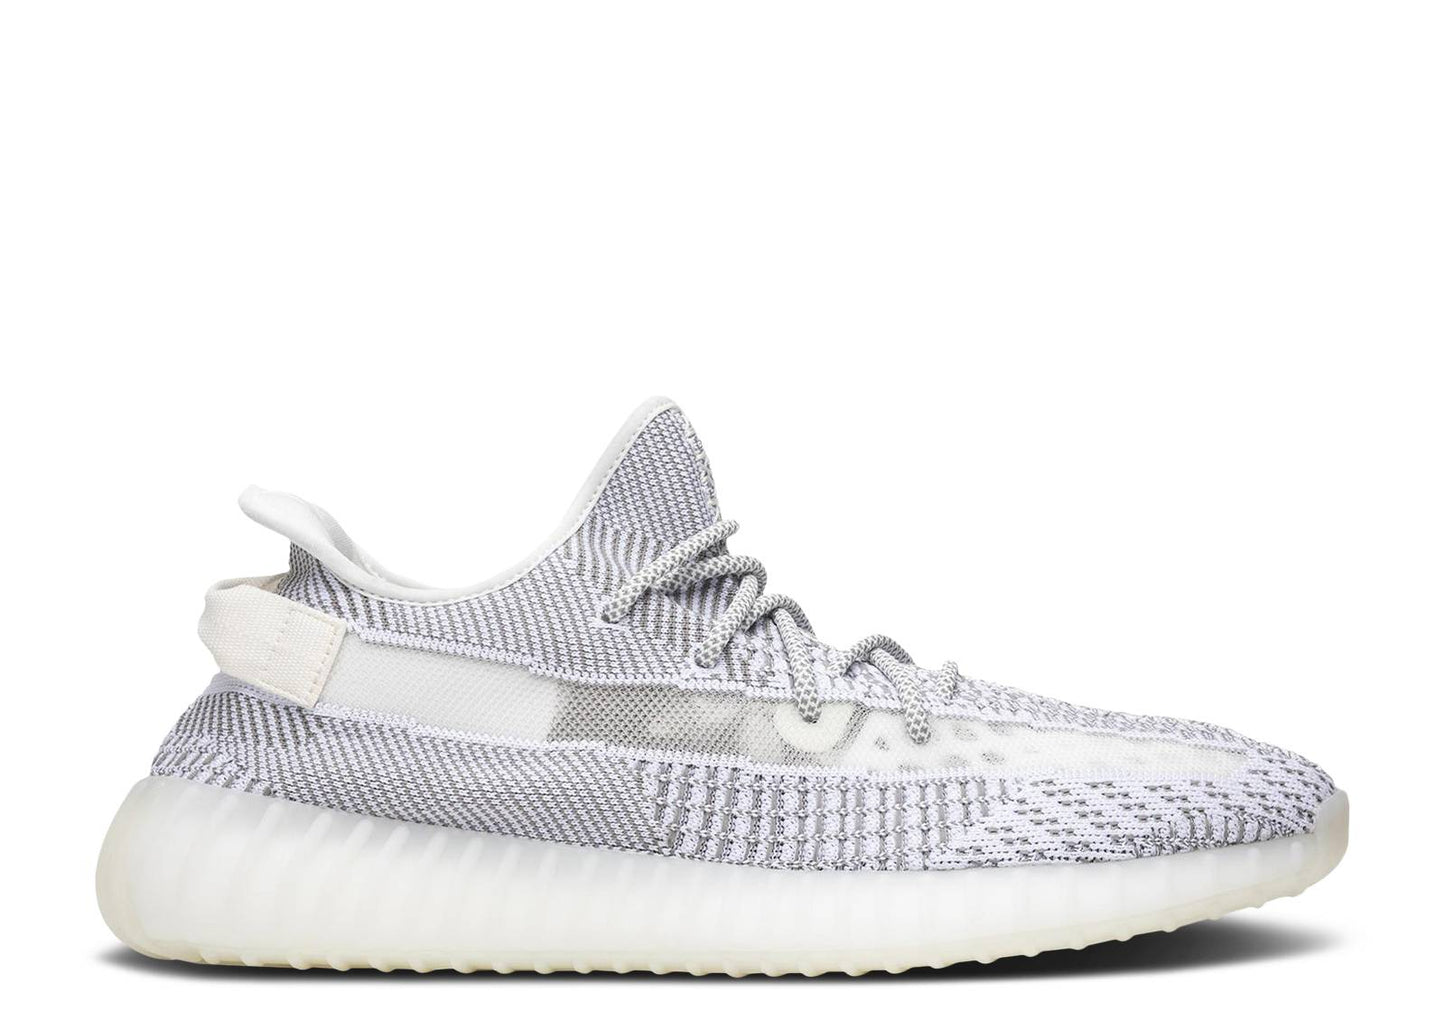 Adidas Yeezy Foam Runner With Free Shipping, Size: 6 To 11 Uk Size